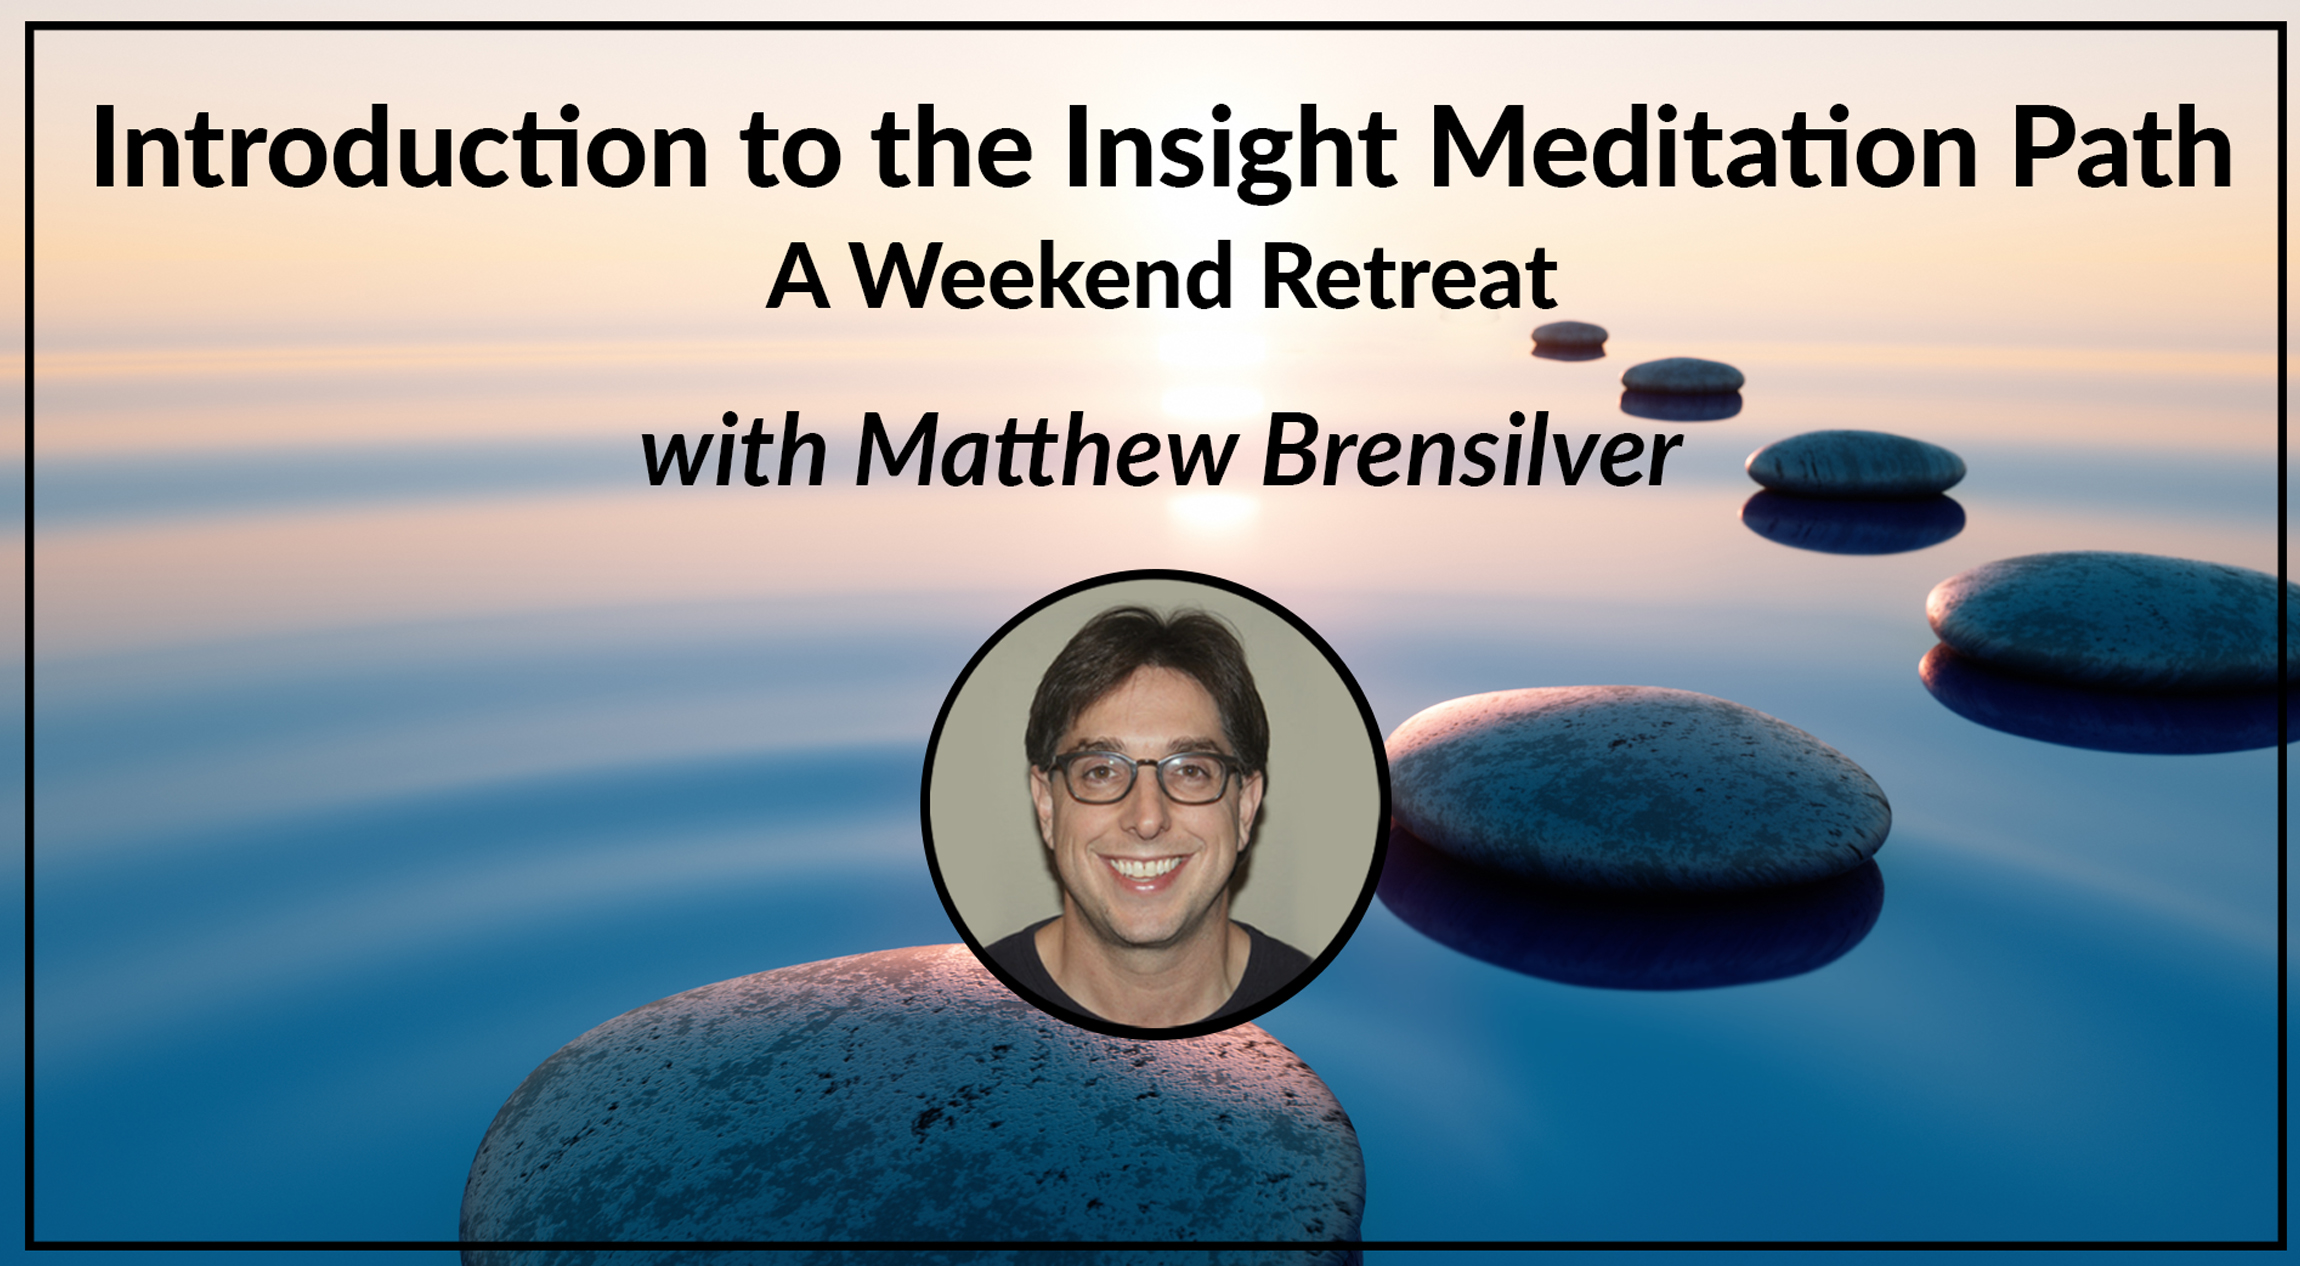 Introduction to the Insight Meditation Path with Matthew Brensilver